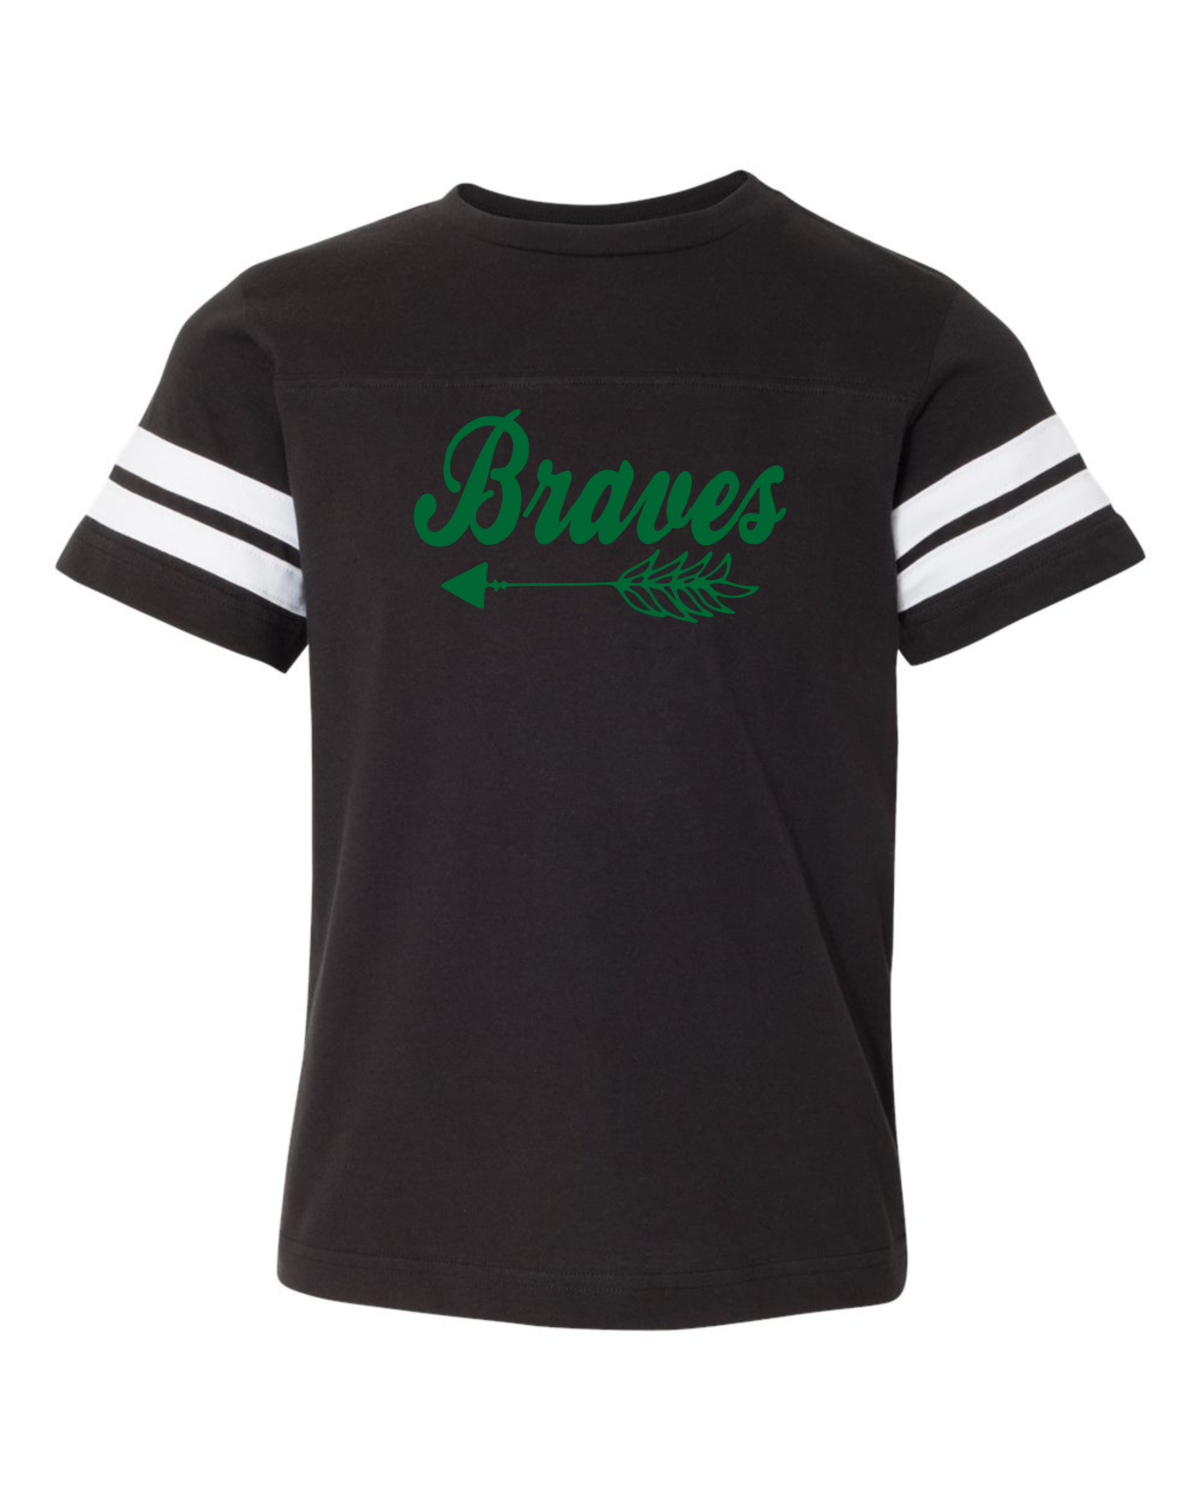 Braves Youth Football Tee, 2 colors available, GLITTER LOGO